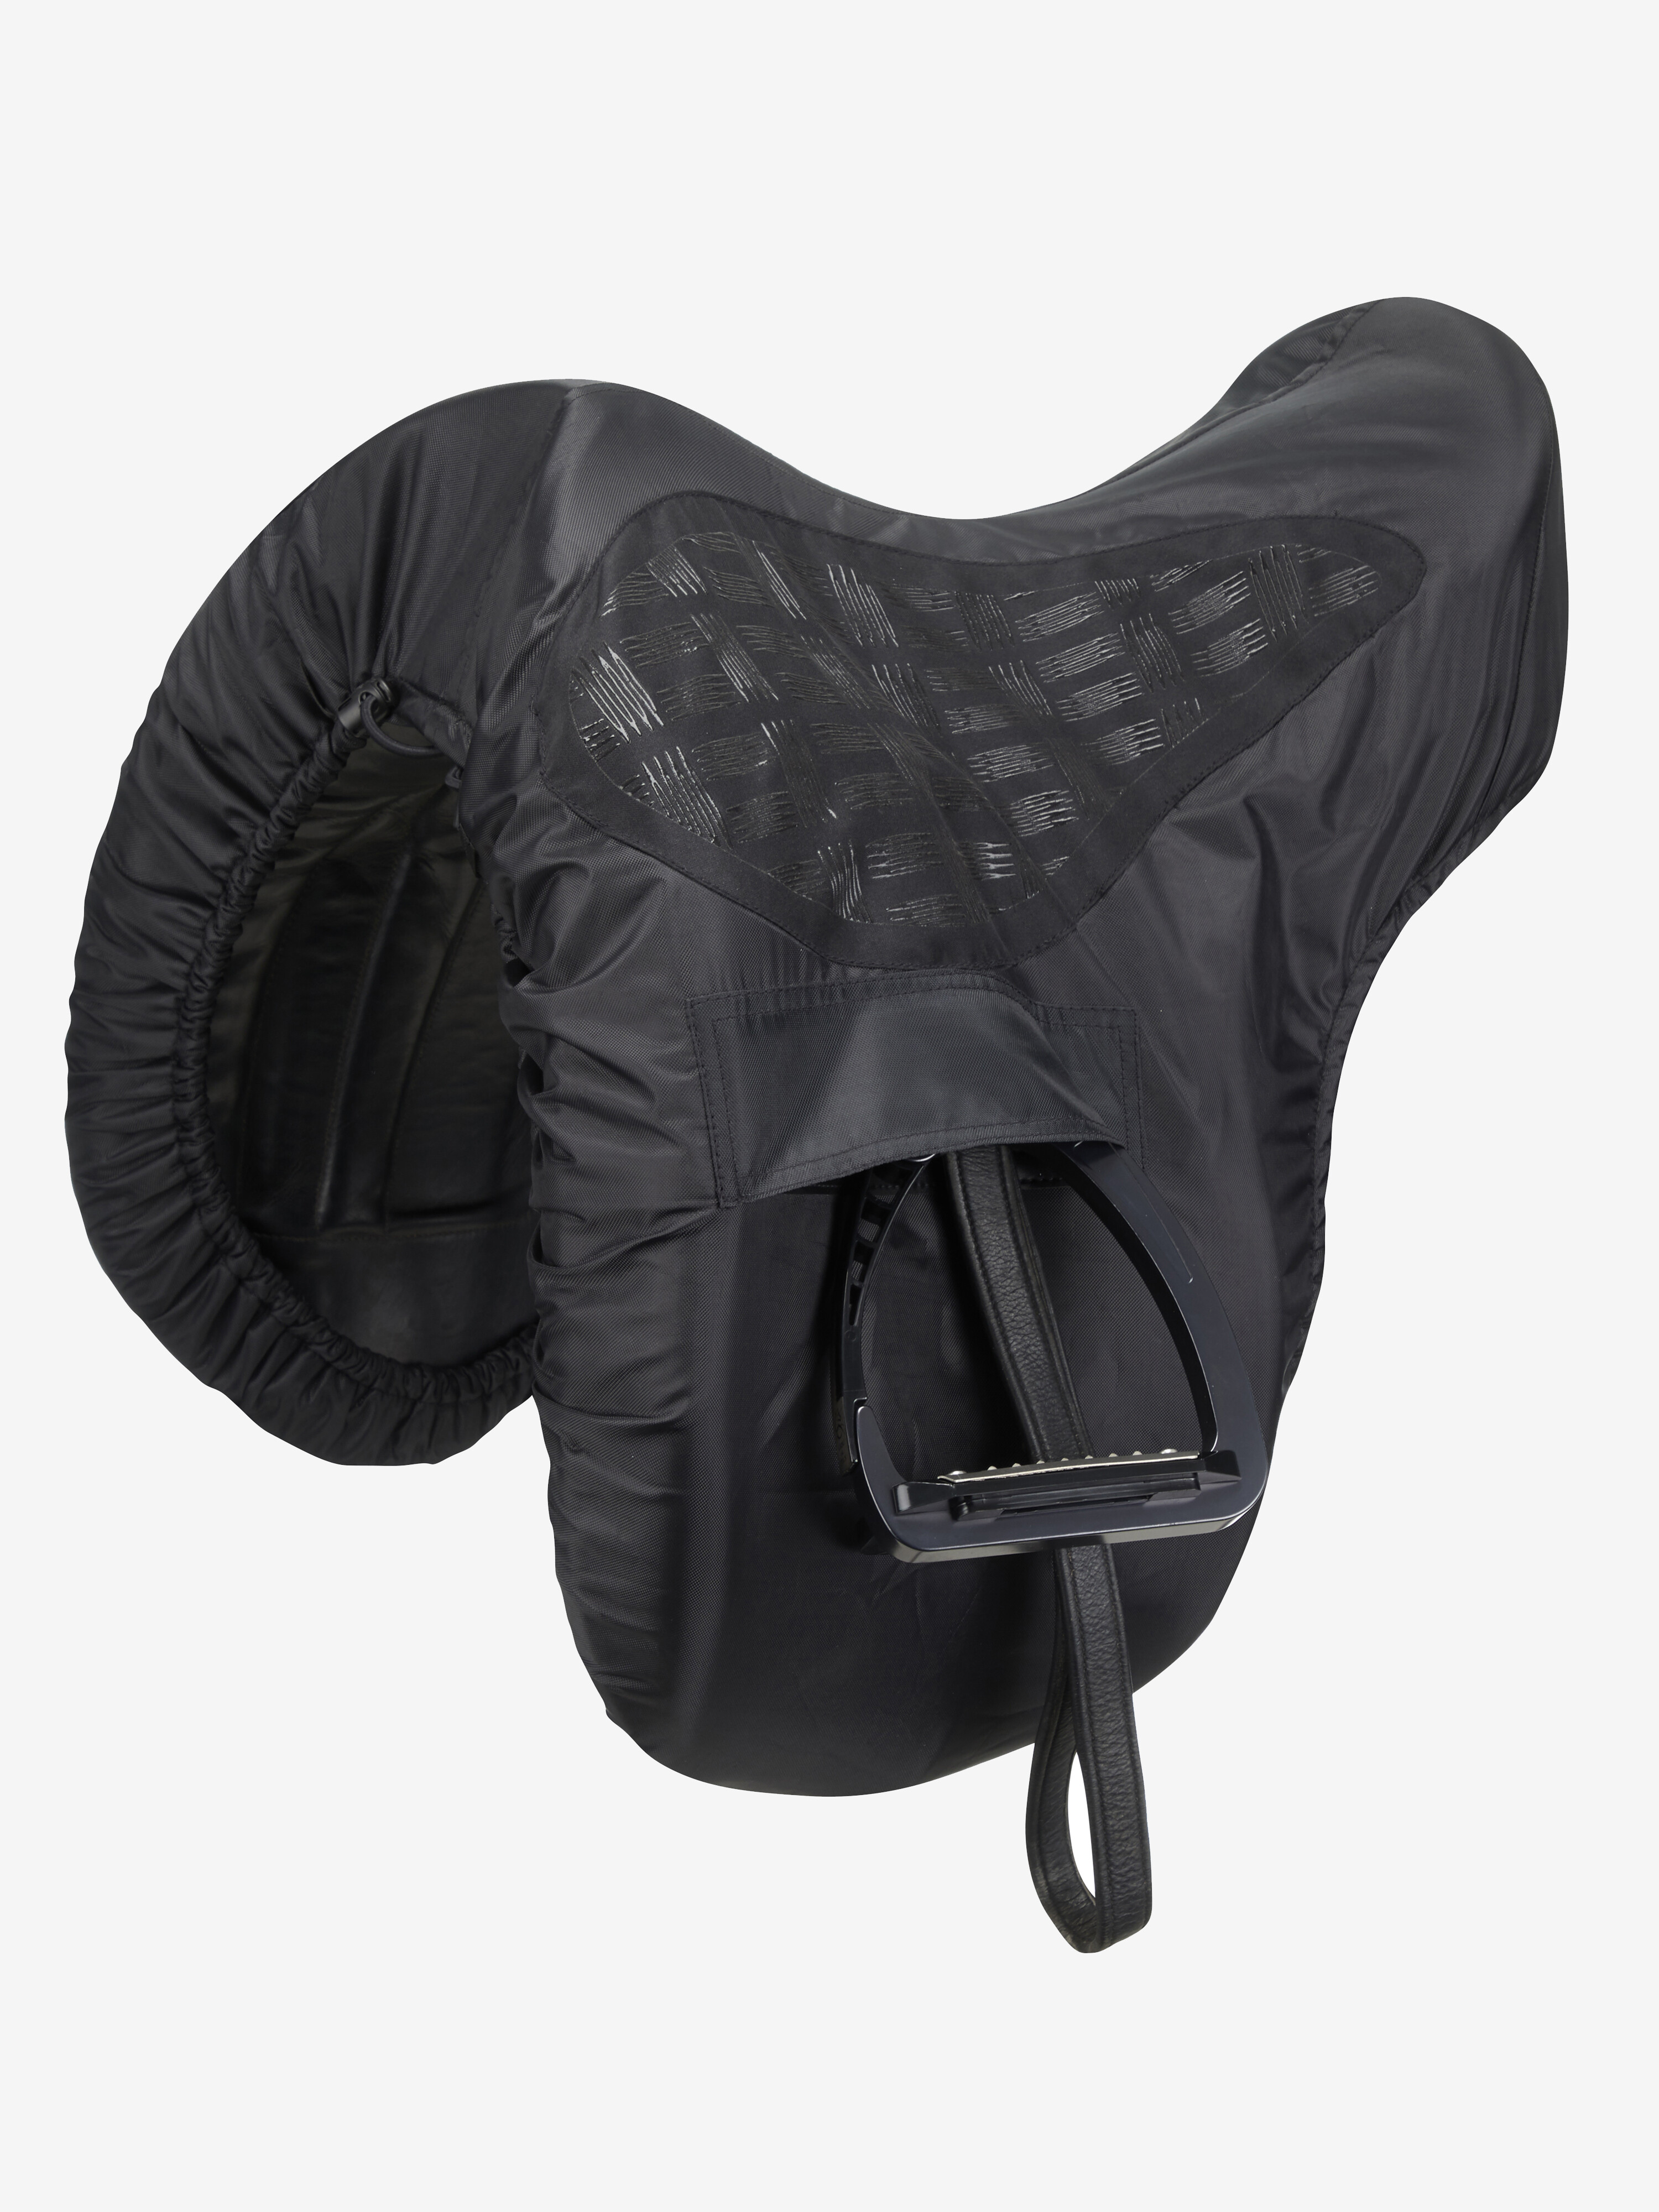 PONY EQUESTRIAN COB SIZED BLACK SADDLE COVER RIDE-ON WATERPROOF HORSE 